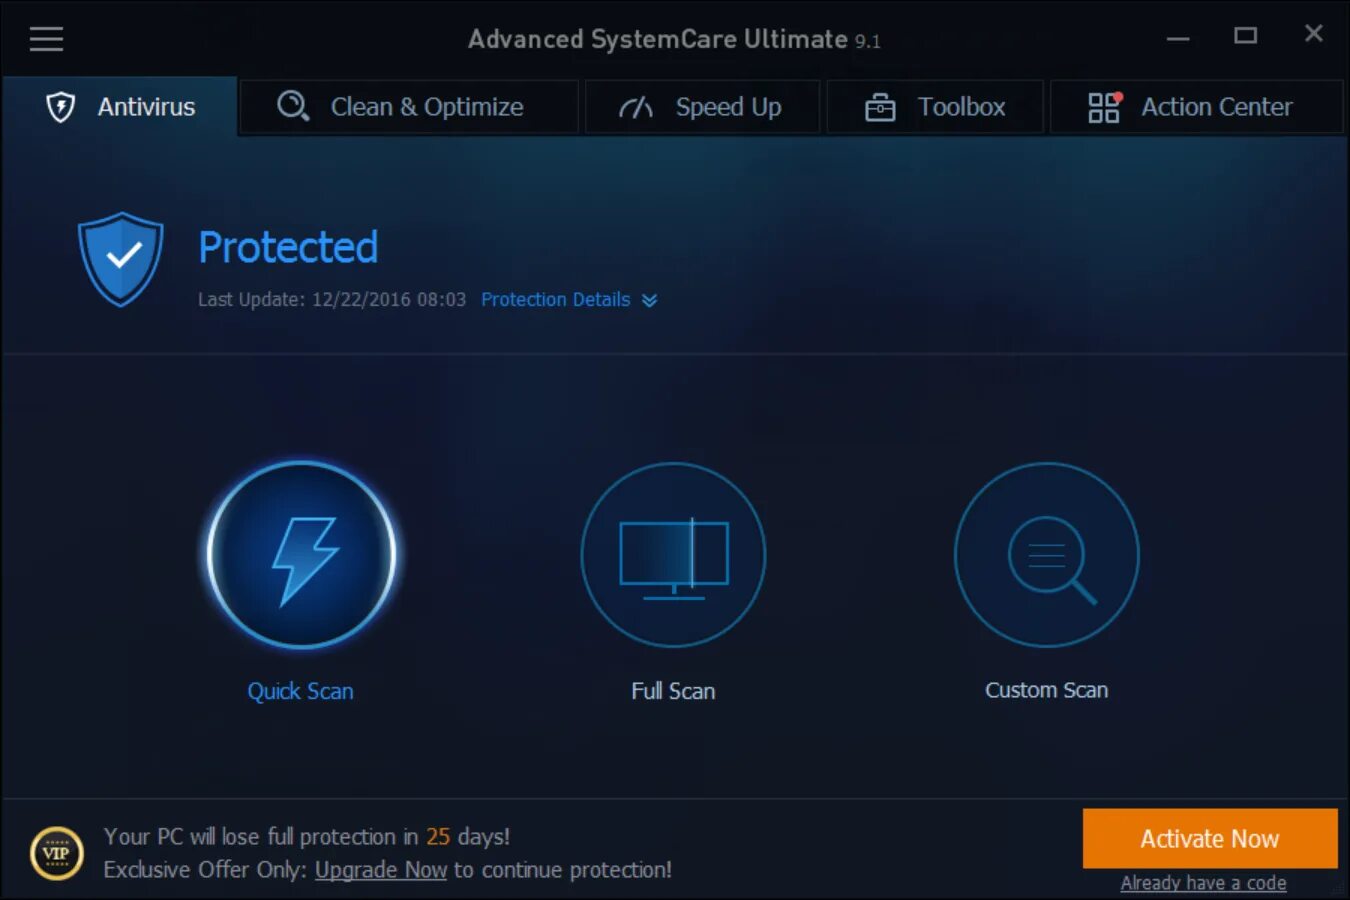 Advanced systemcare pro repack. Advanced System Care Ultimate(с антивирусом). Advanced SYSTEMCARE Ultimate с антивирусом. Advanced SYSTEMCARE 17. Адвансед систем каре 15.